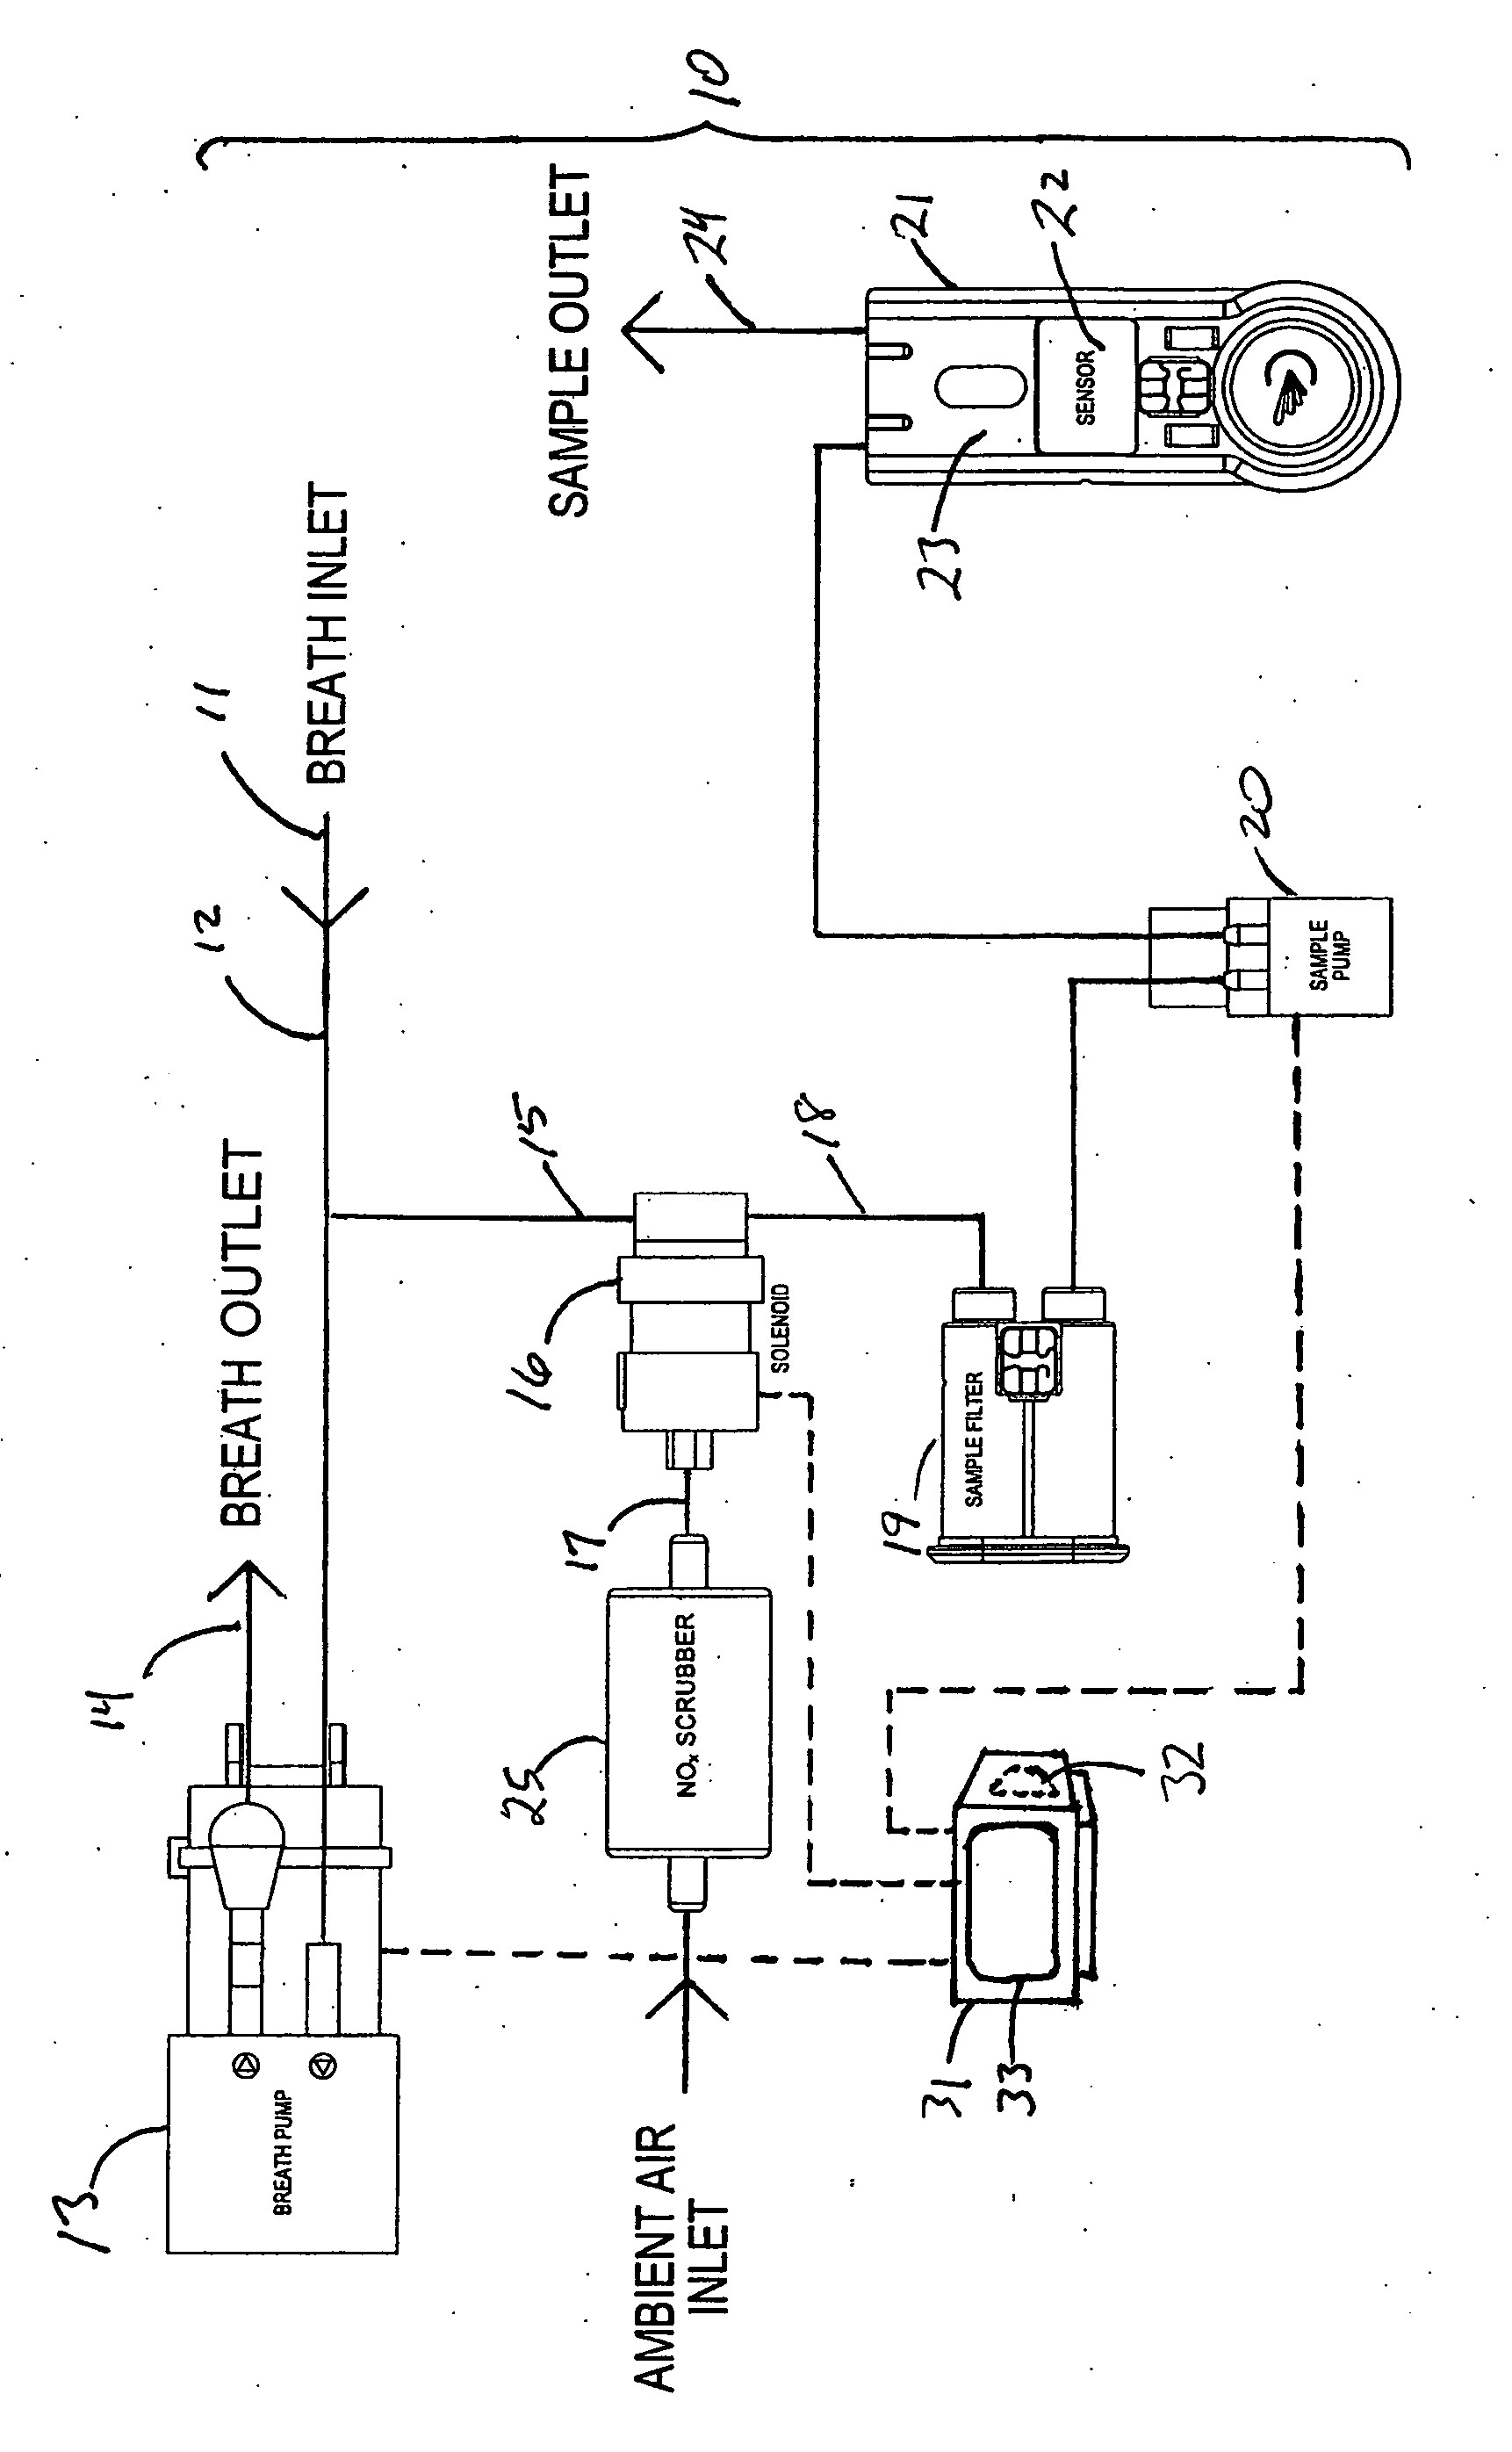 Analyzer for Nitric Oxide in Exhaled Breath with Multiple-Use Sensor